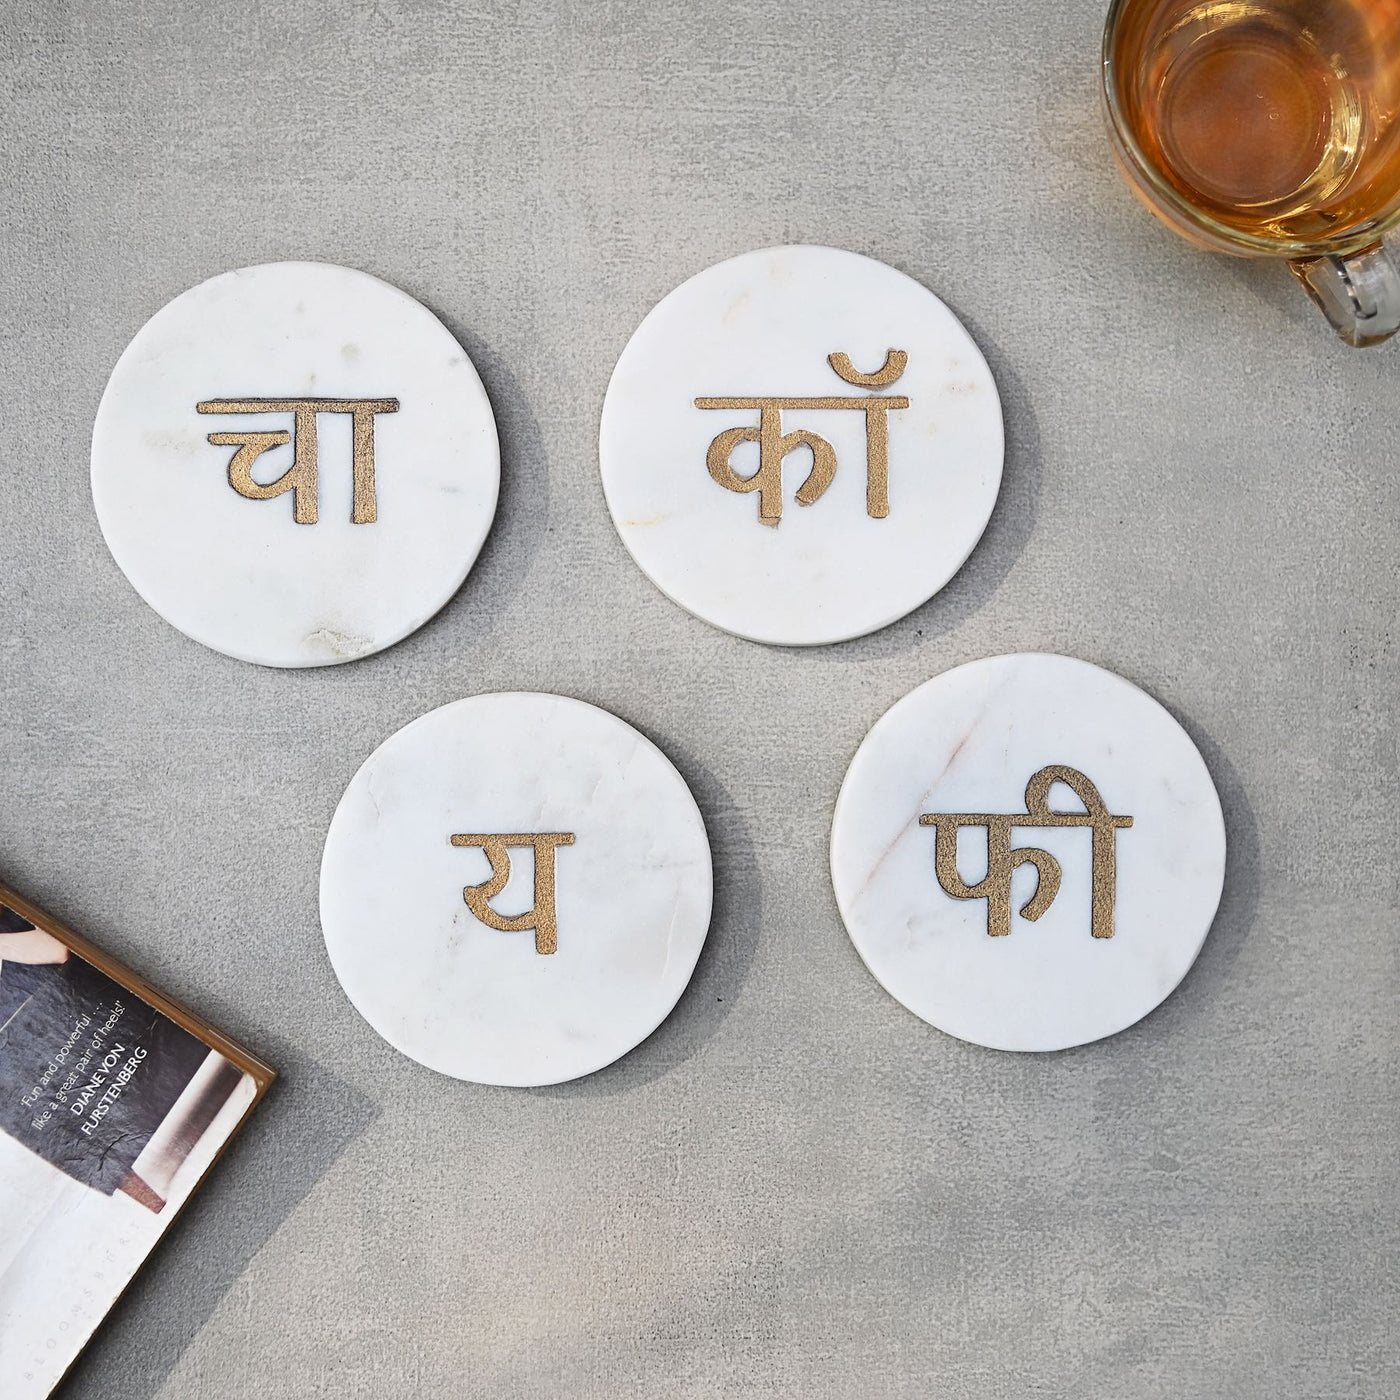 marble coasters with brass inlay in hindi